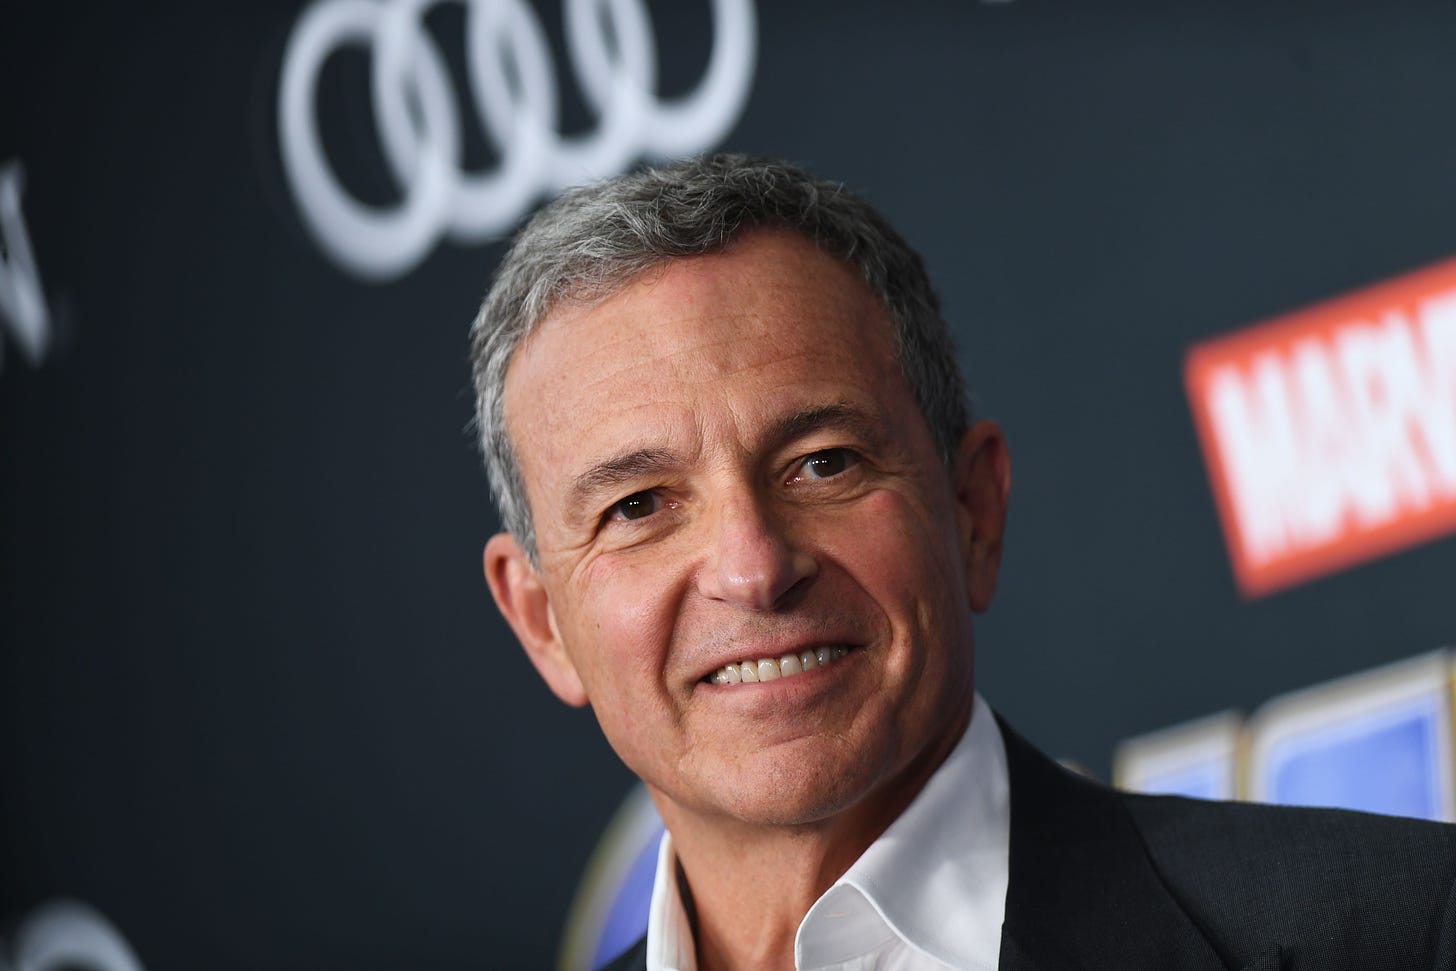 Disney CEO Bob Iger earns 1,000 times as much as a typical employee